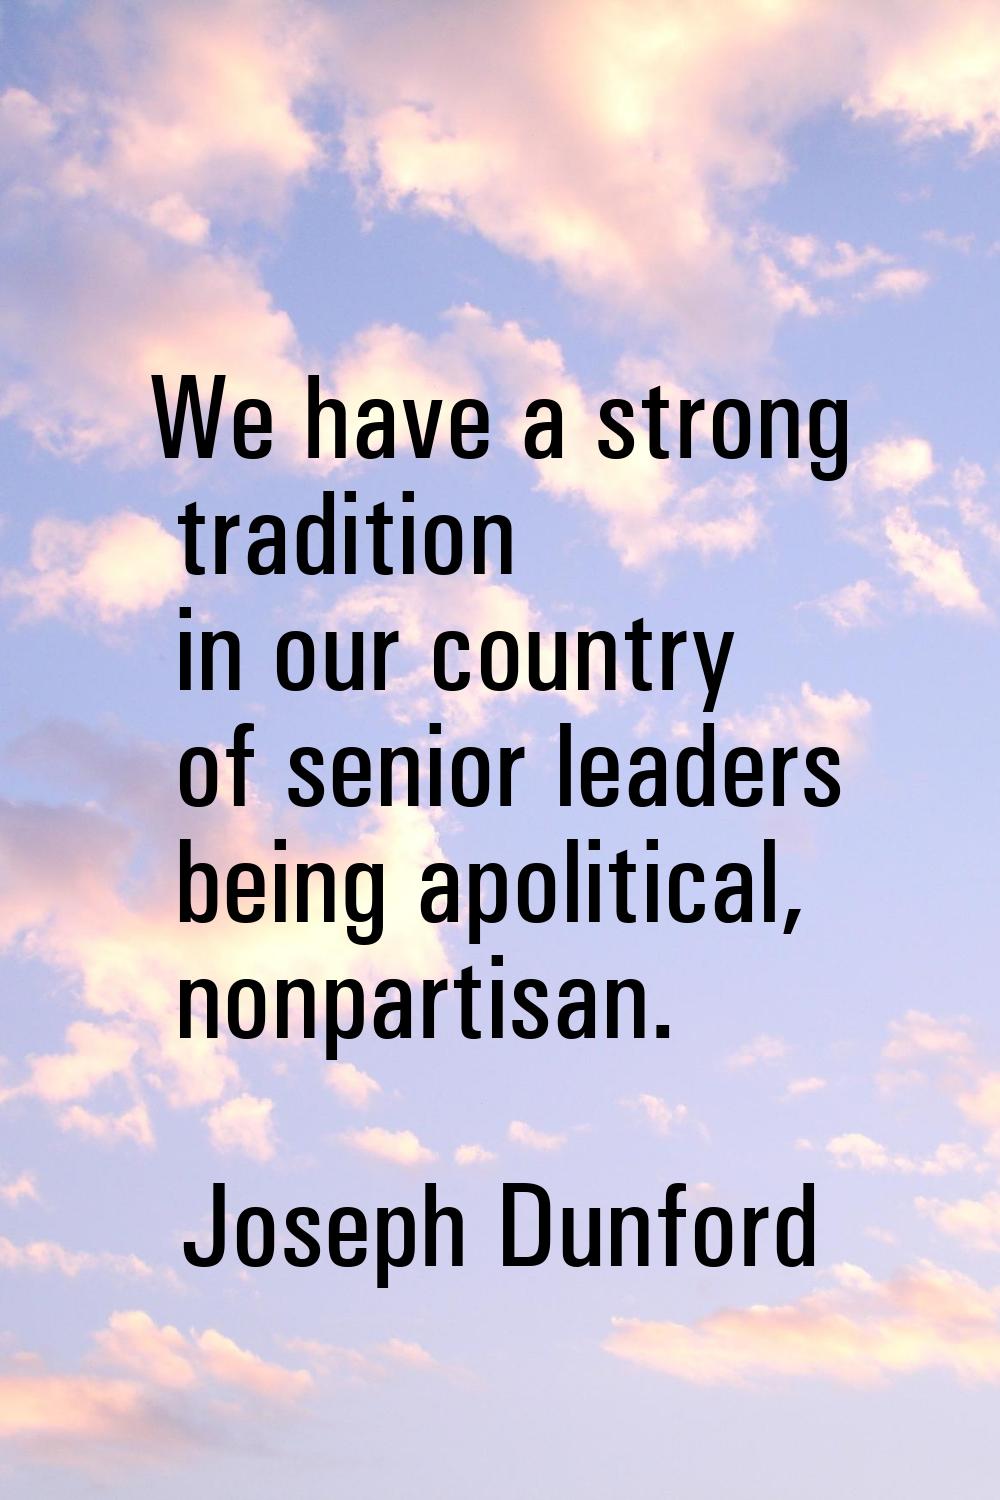 We have a strong tradition in our country of senior leaders being apolitical, nonpartisan.